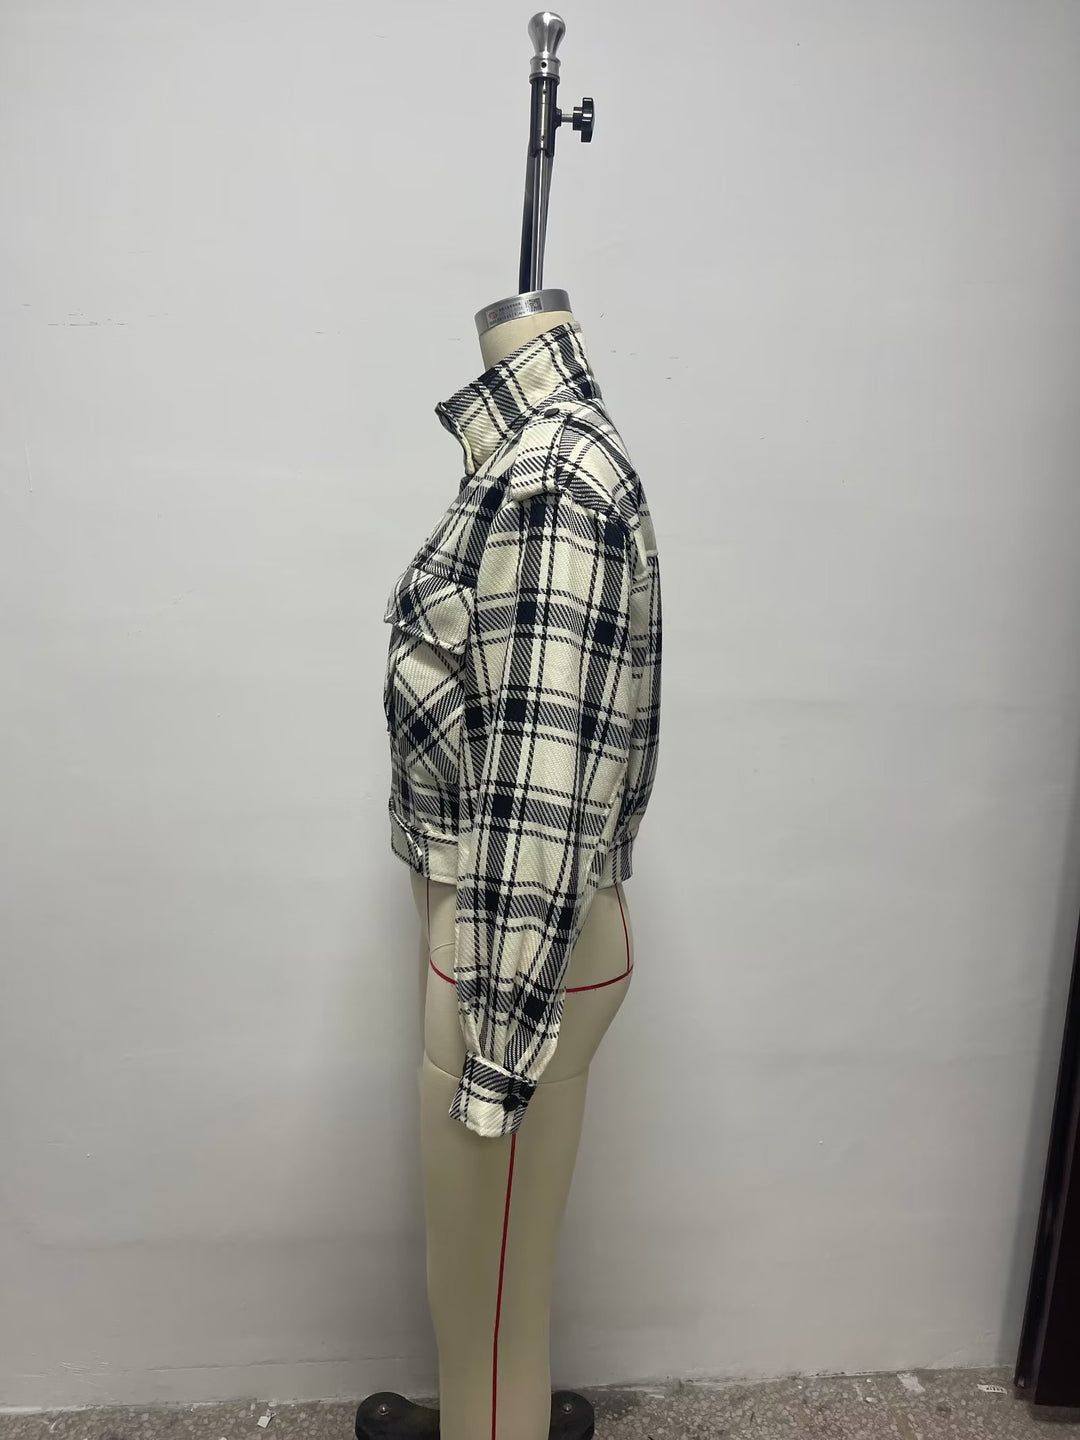 Spring Autumn Women Clothing Classic Tweed Mid Length Large Loose Pockets Plaid Jacket Casual